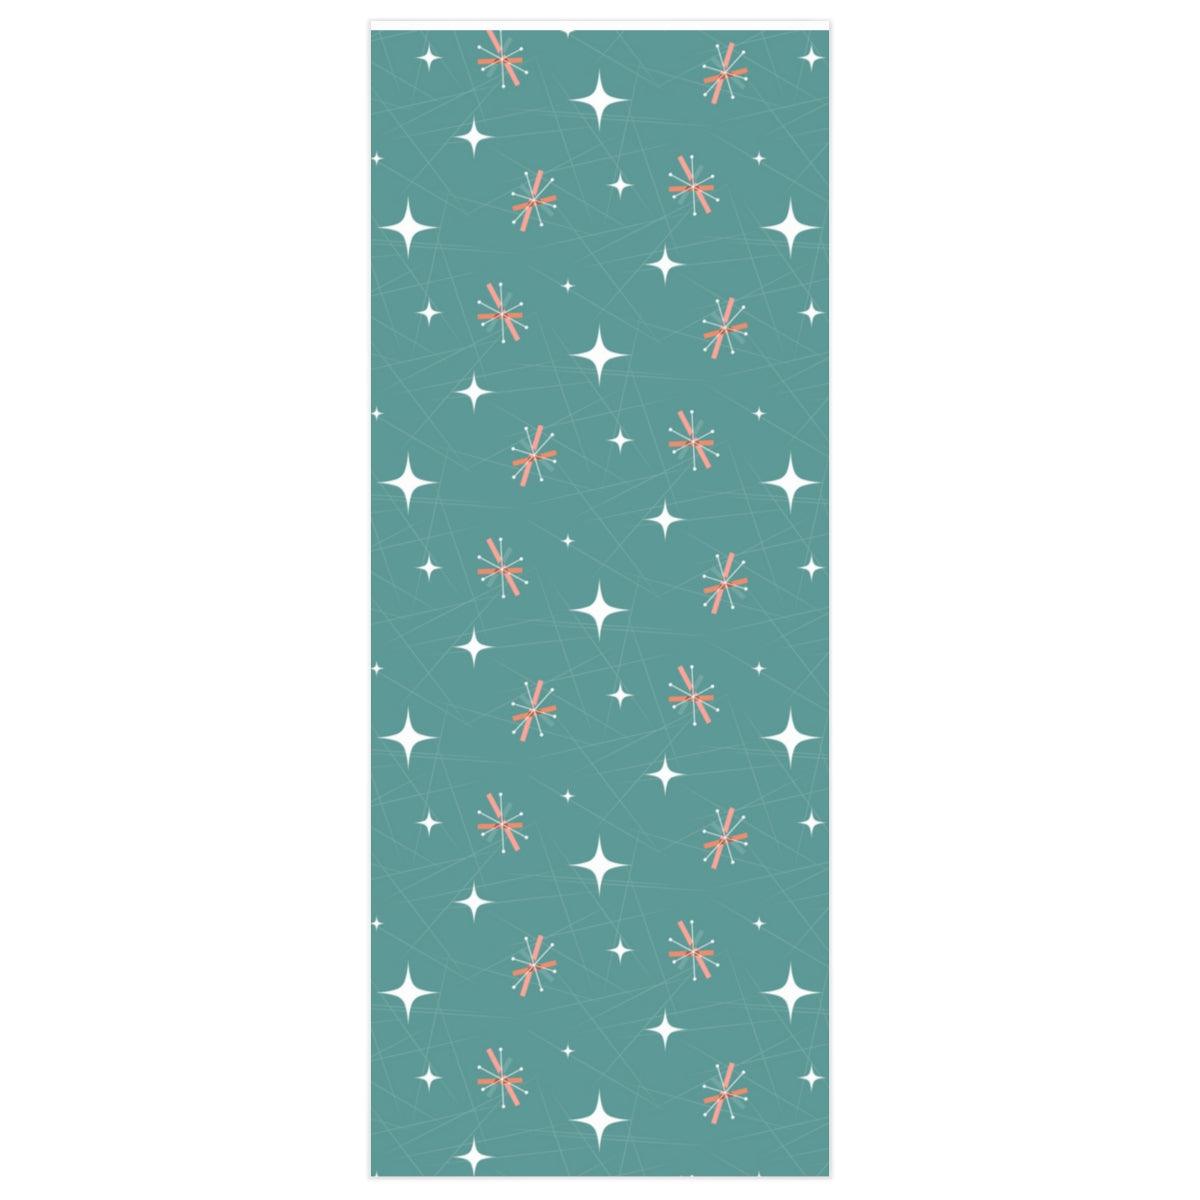 MCM Atomic Burst Pink & Turquoise Gift Wrapping Paper | lovevisionkarma.com